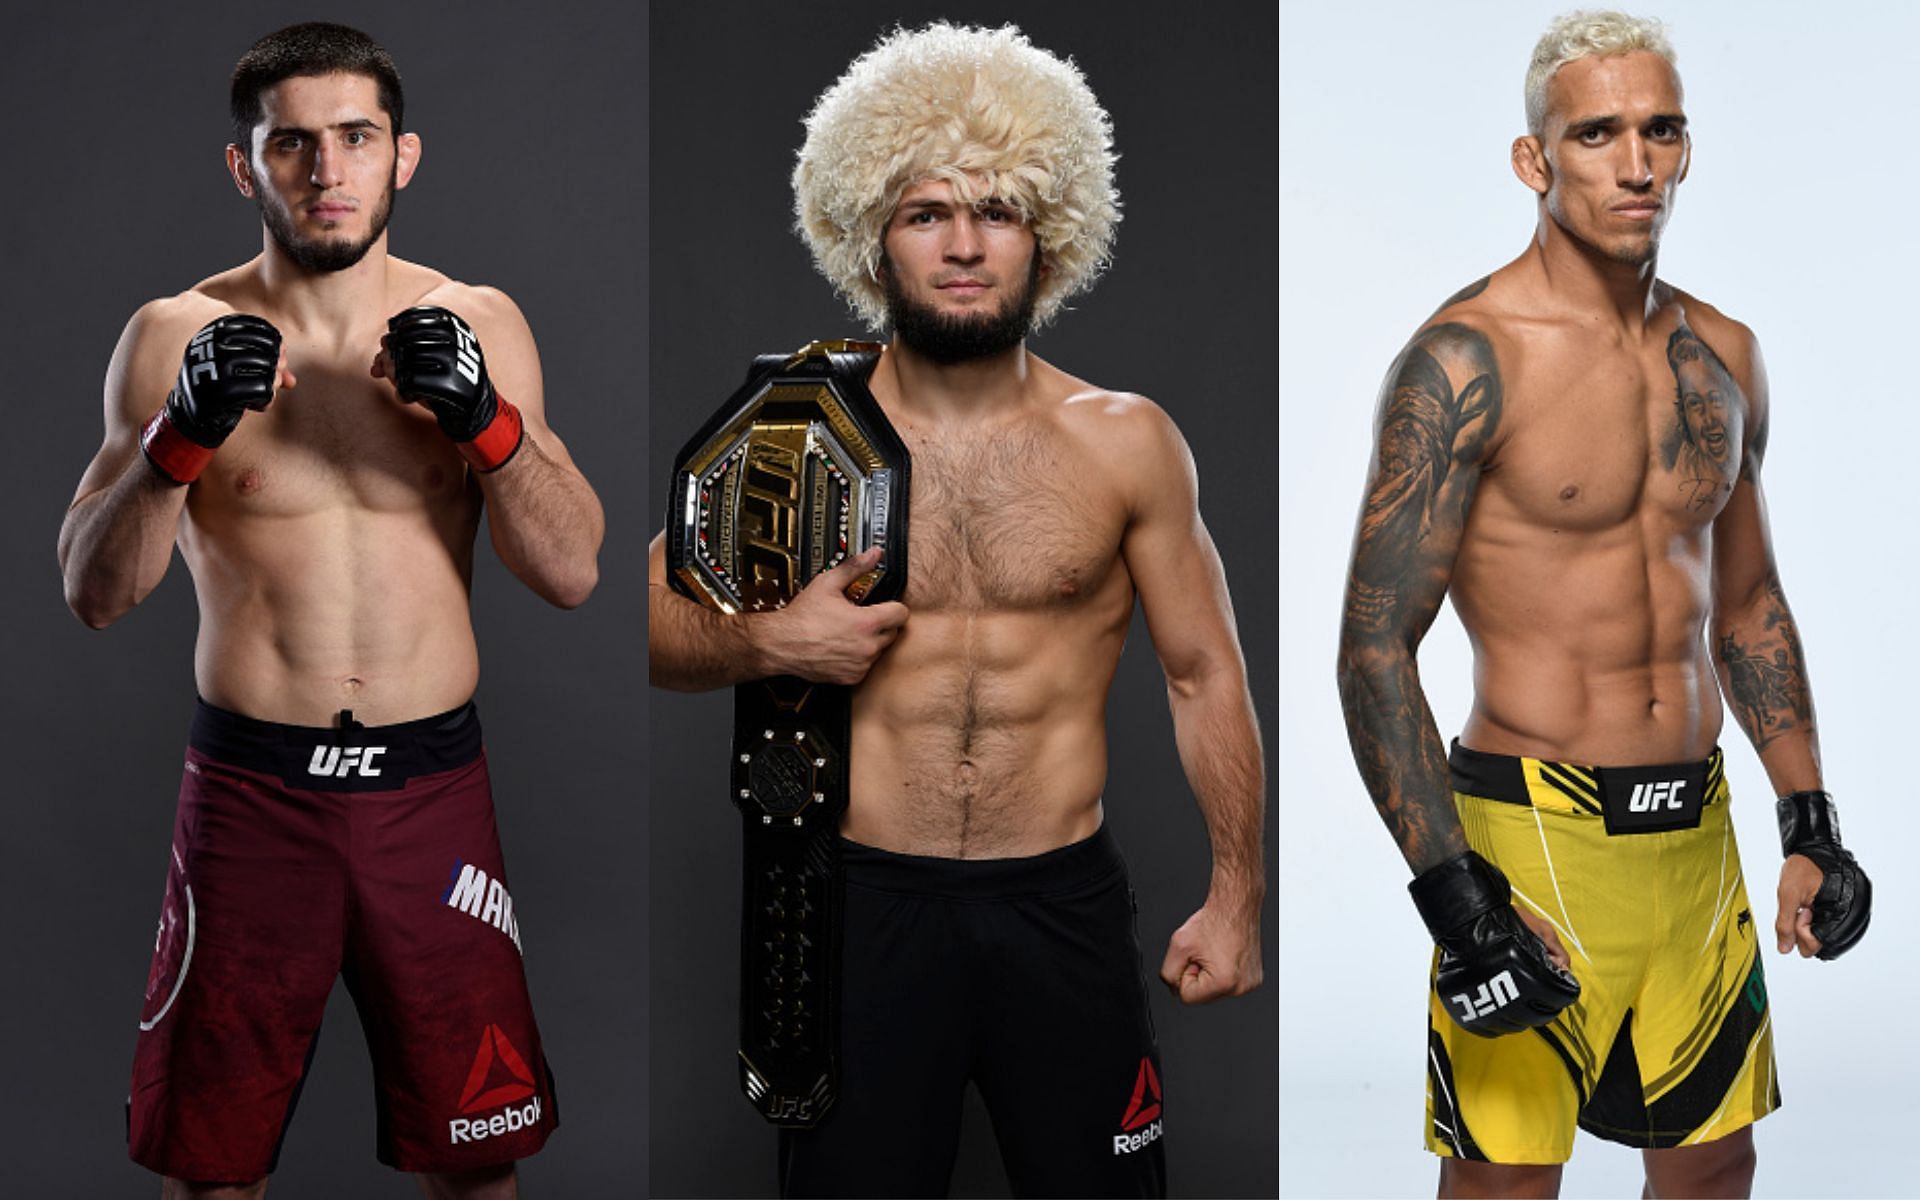 Islam Makhachev (left), Khabib Nurmagomedov (middle), and Charles Oliveira (right)(Images via Getty)